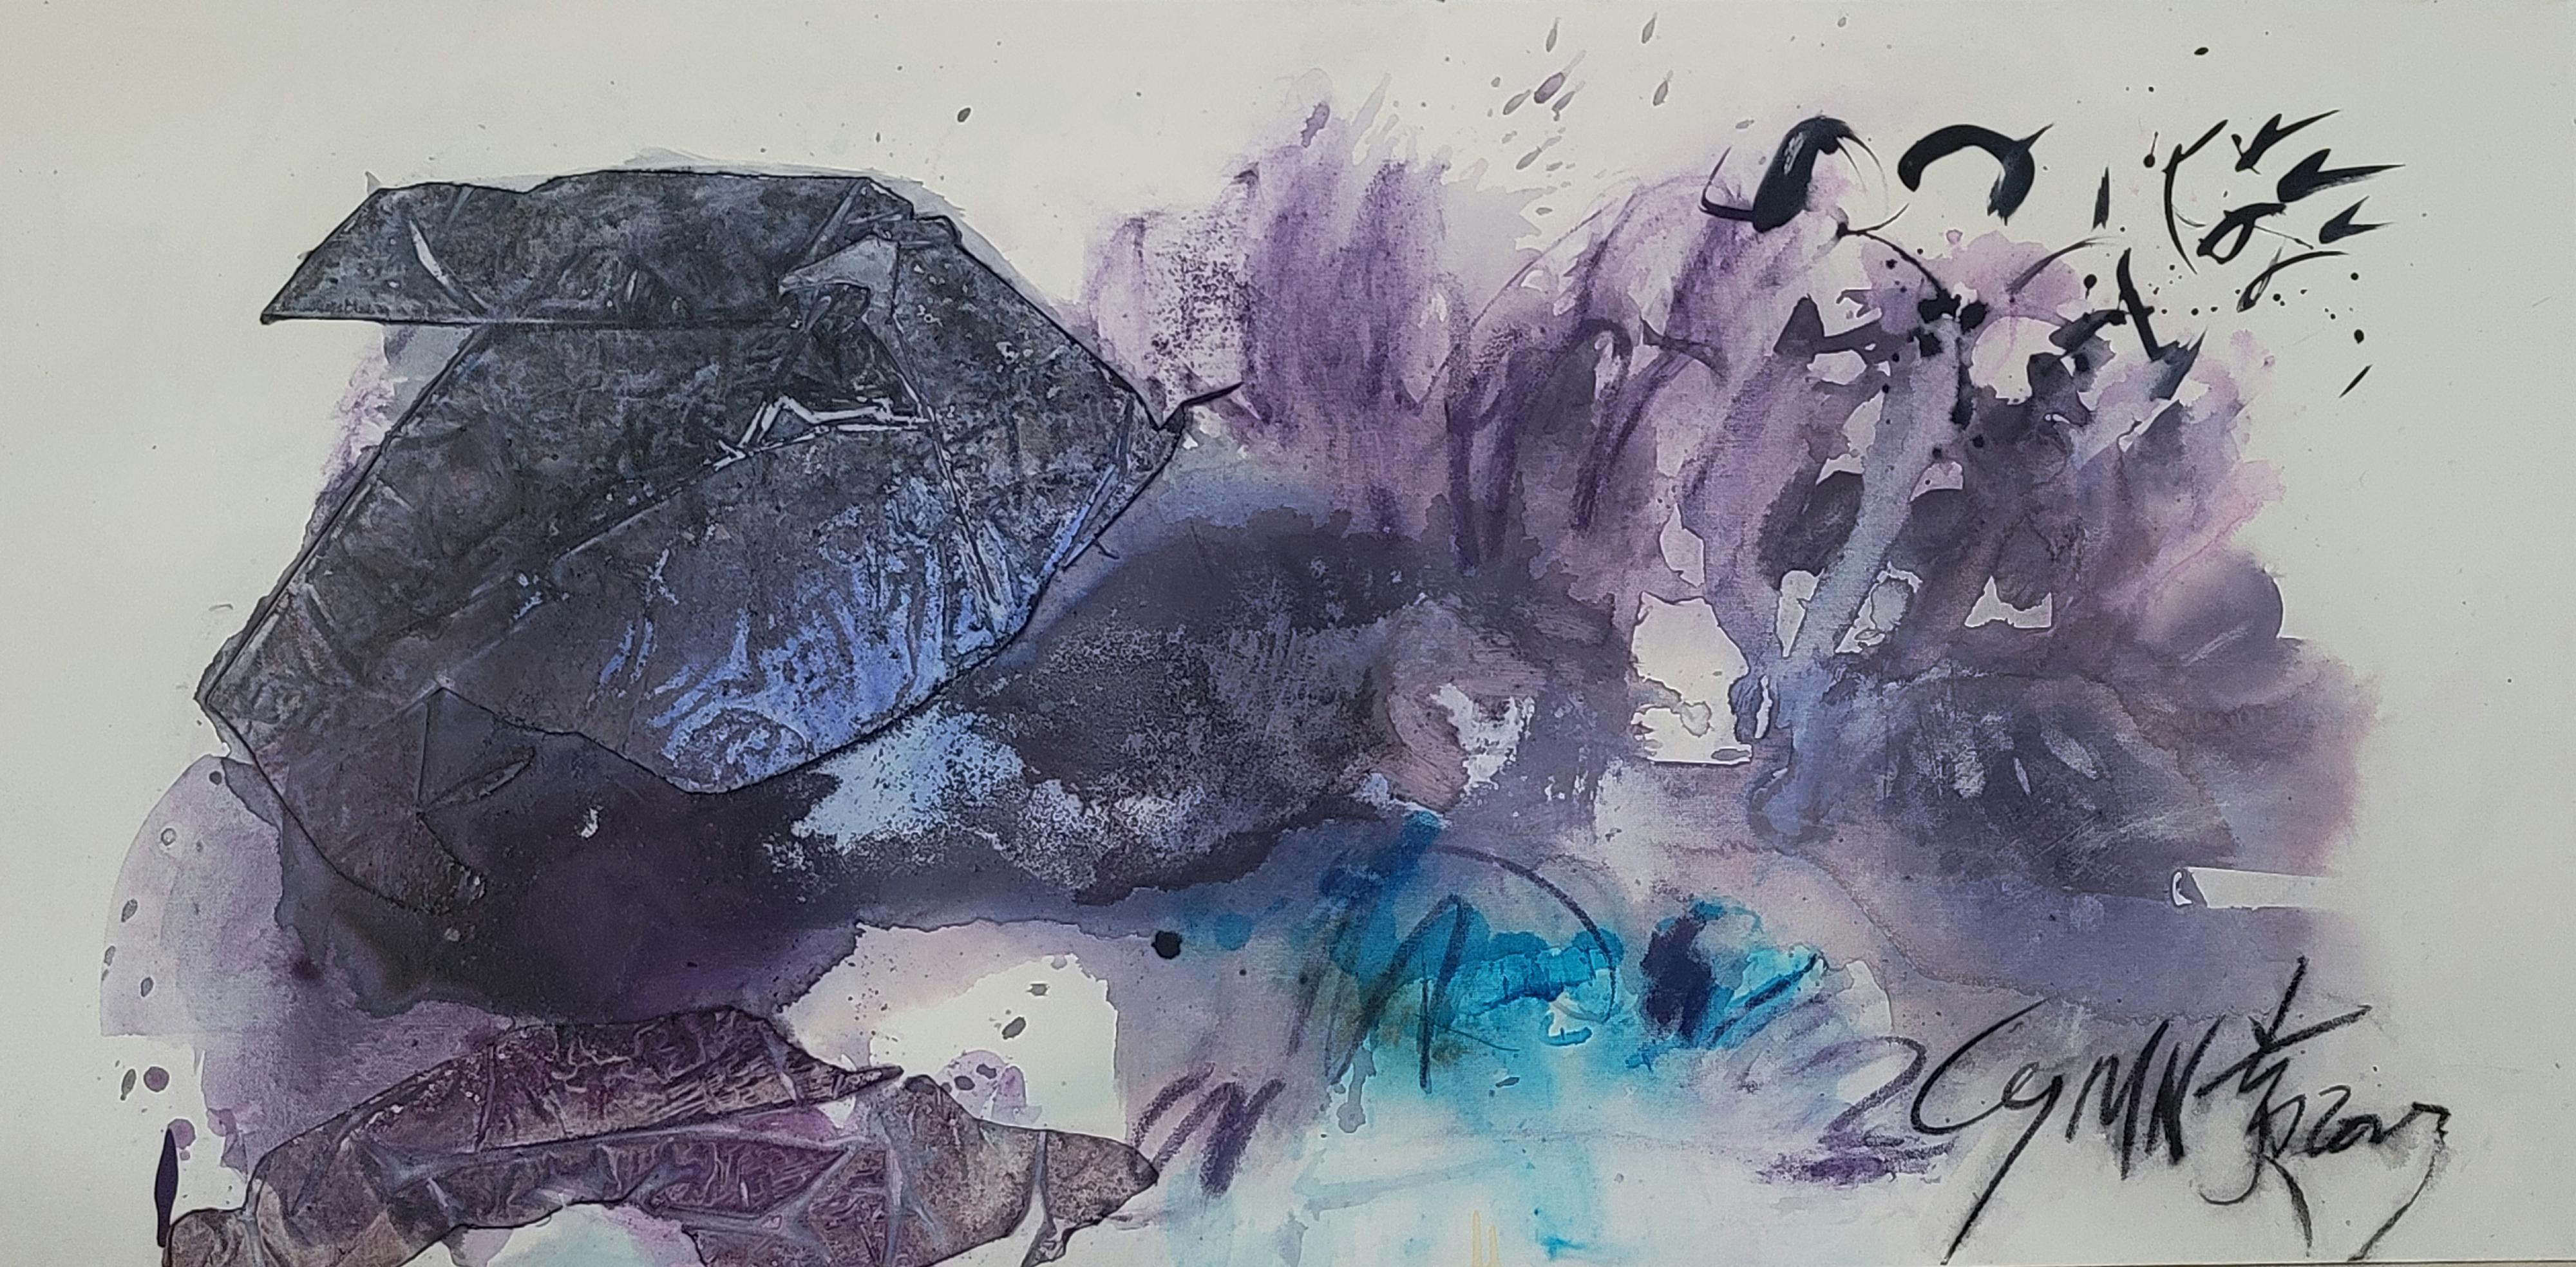 The Lone Bloom - Lyrical, Expressive Abstract, Zen Calligraphy - Painting by Cymn Wong 